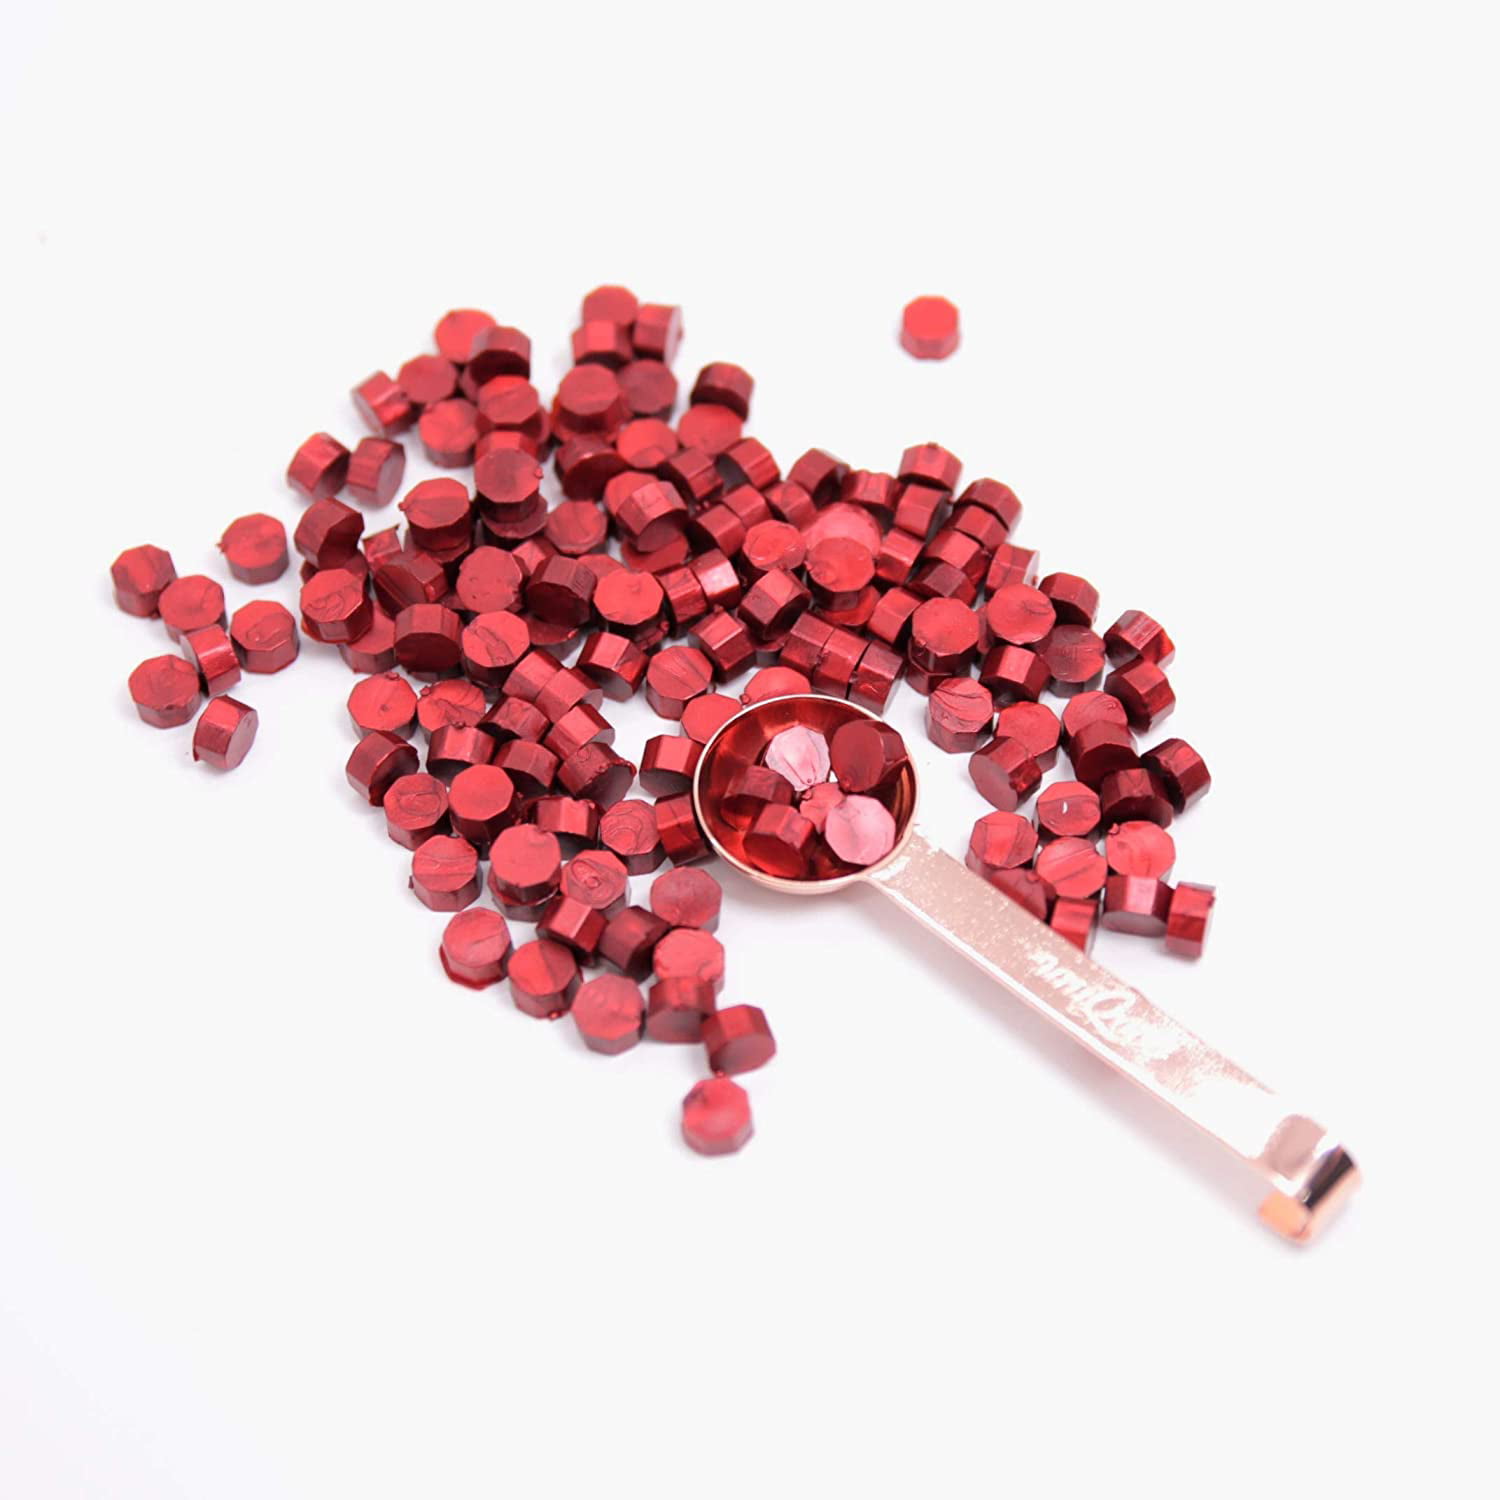 Sealing Wax Beads - Ruby Red | Red Sealing Wax for envelope seals |  Invitation Stamps | Wax seal supplies